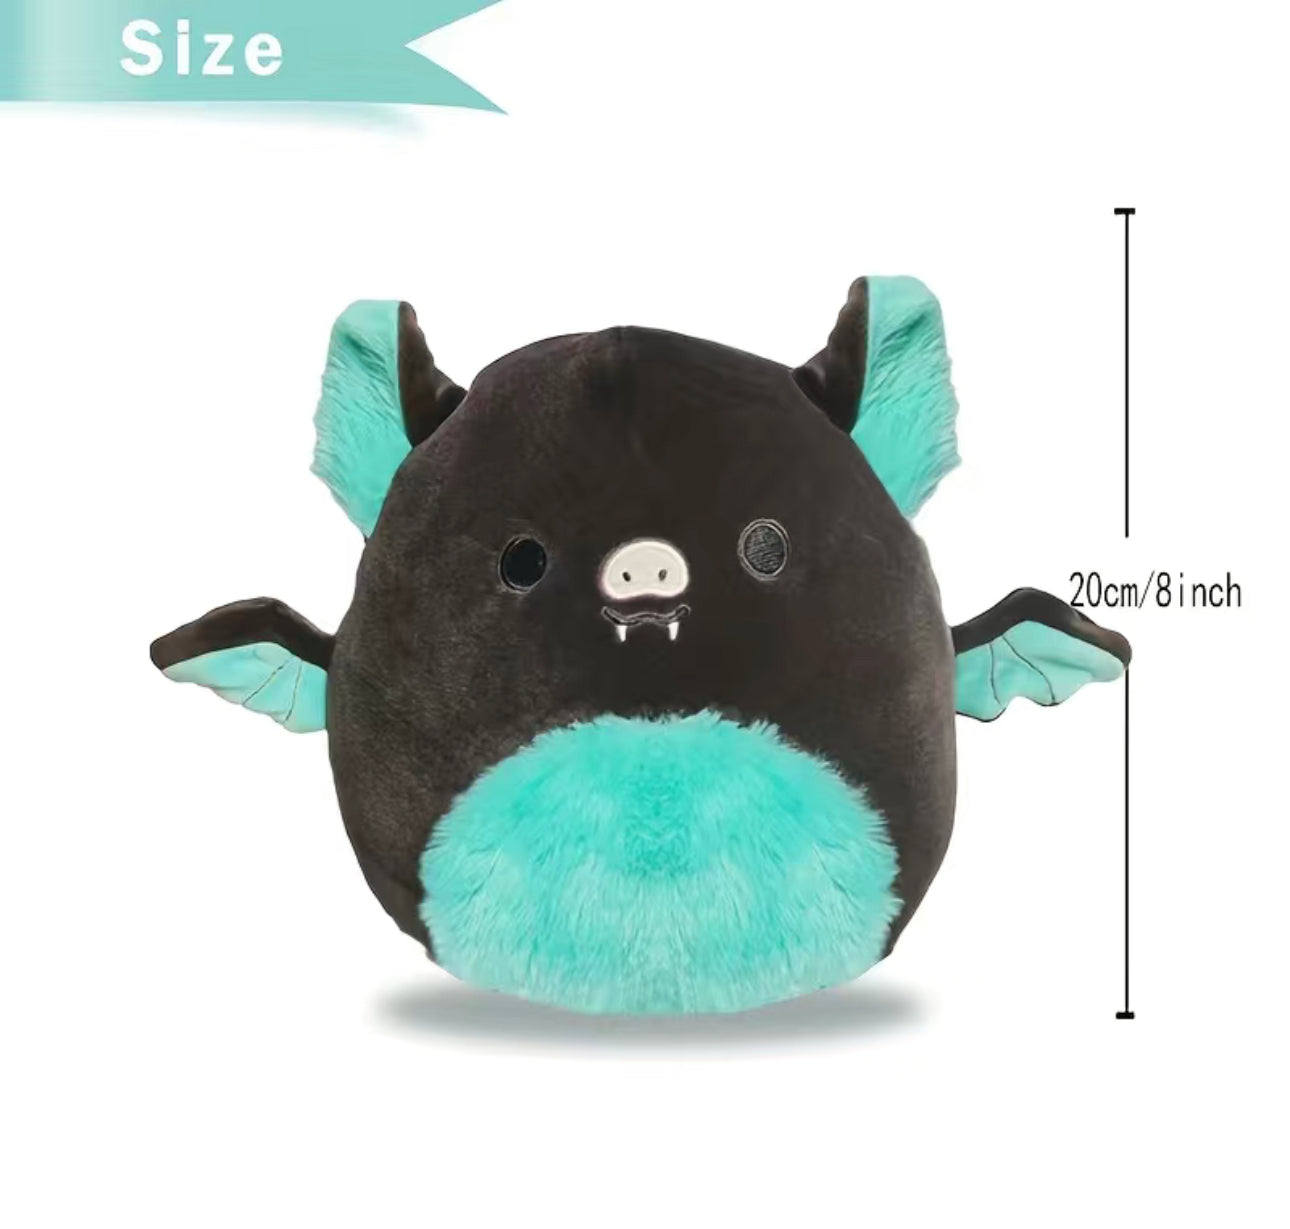 8inch/20cm Black Fruit Bat Stuffed Animal Plush Pillow, Soft Cute Plush Pillow Toy Home Decoration, Best Birthday Gift For Children Girlfriend Collection Gift